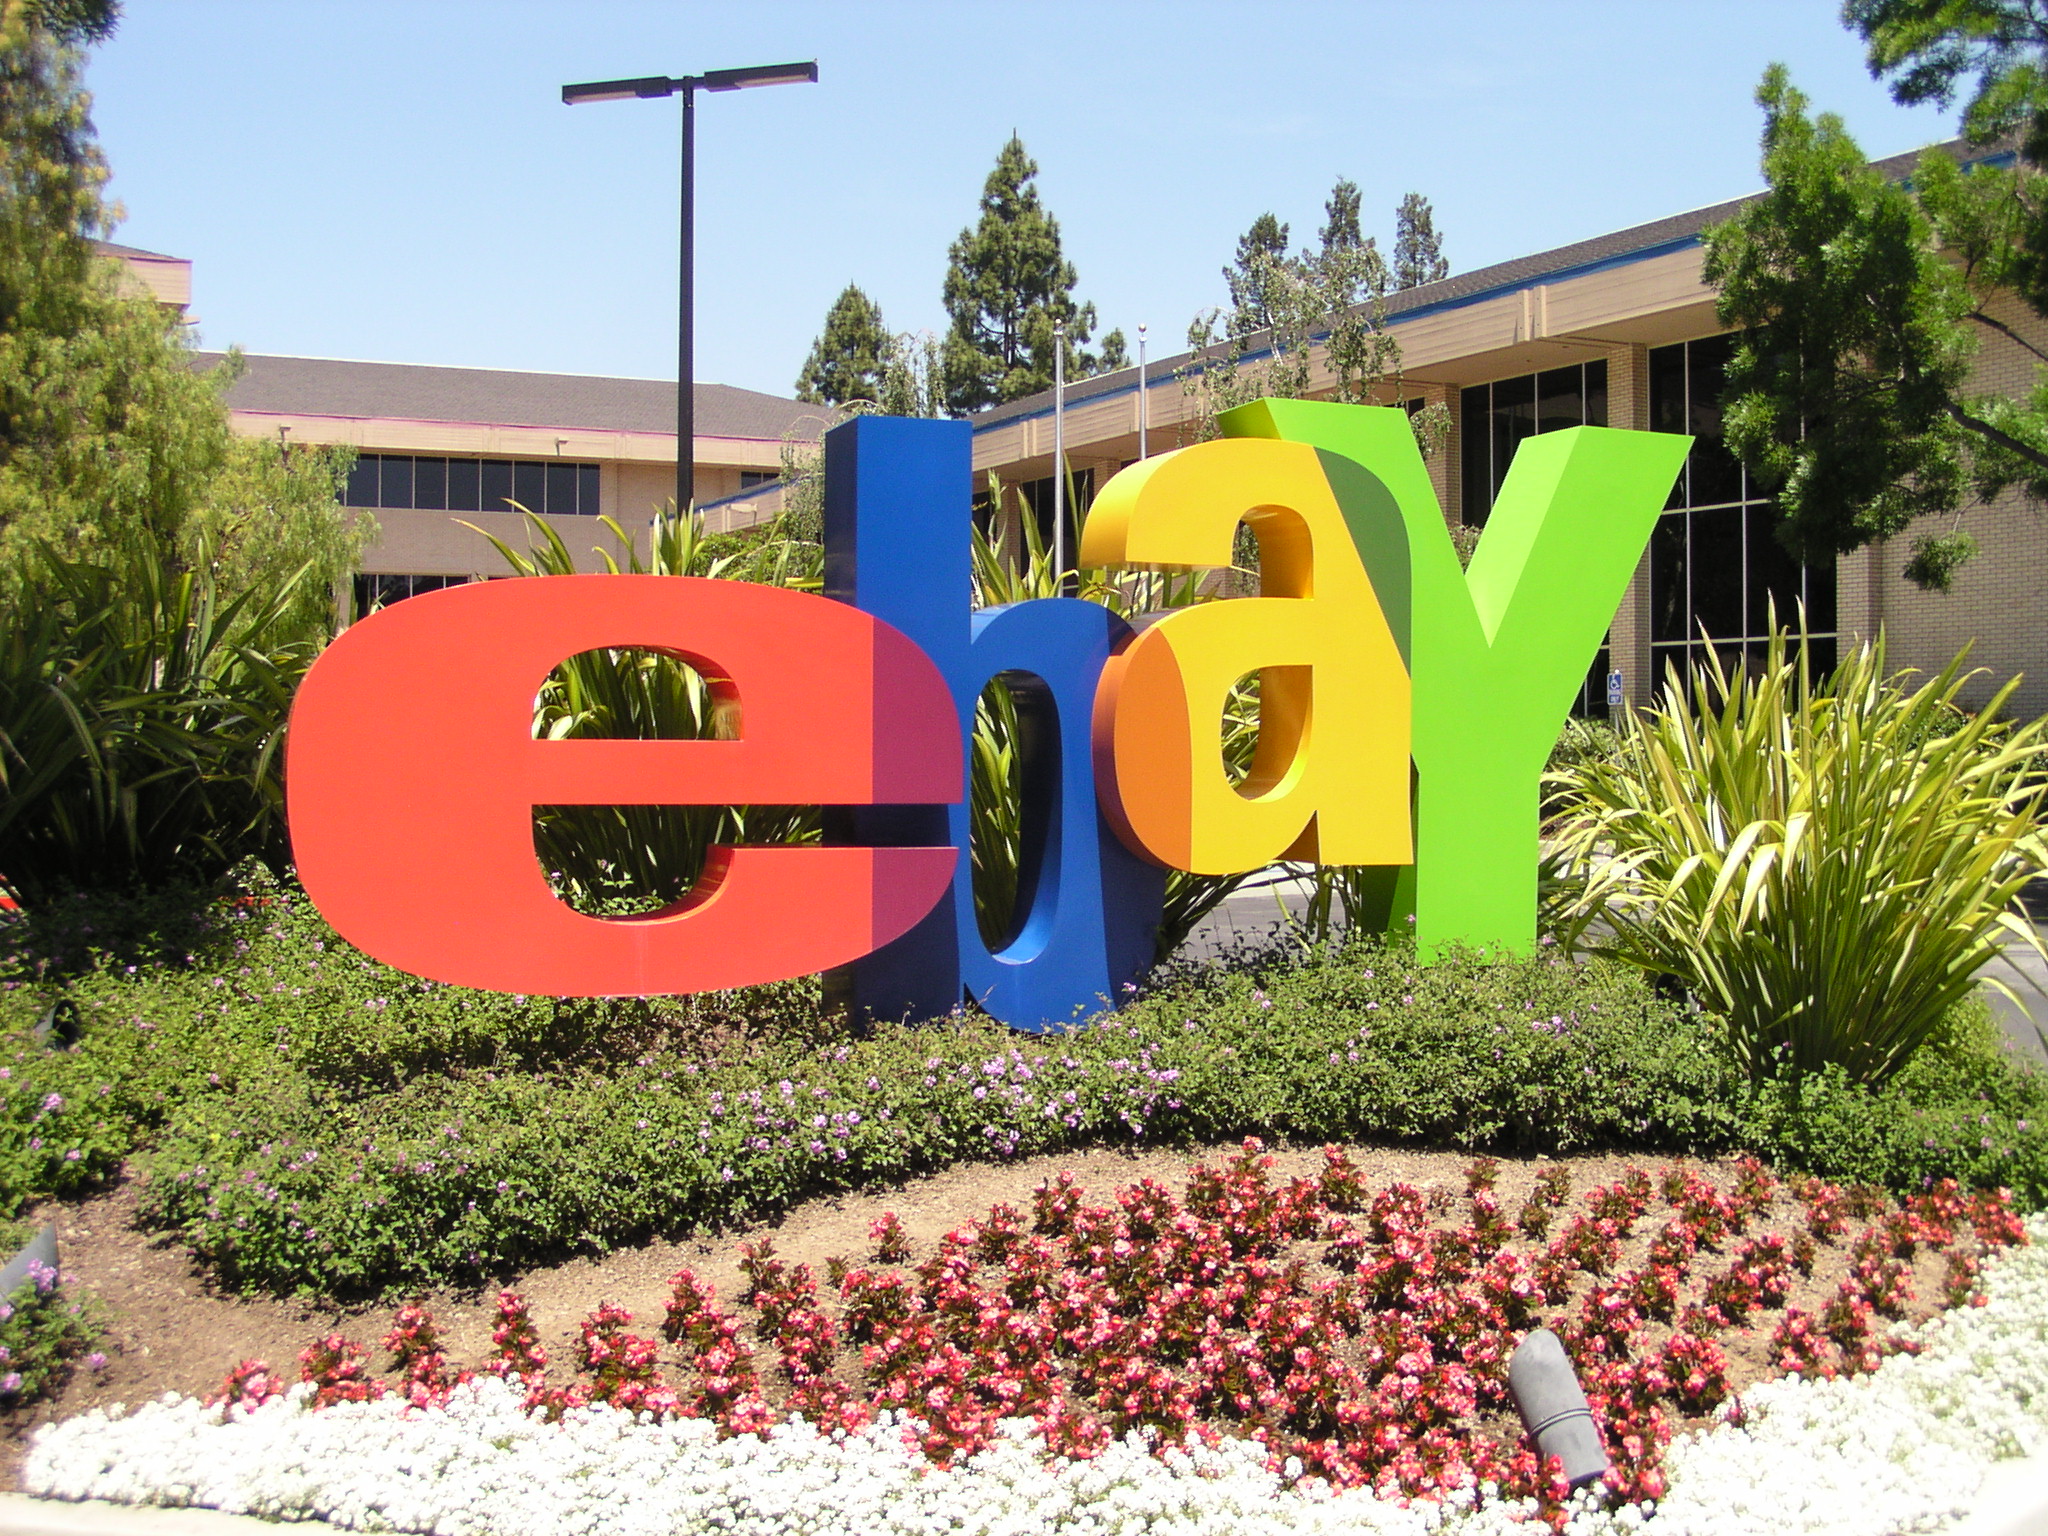 New and Improved eBay Earnings Higher than Expected